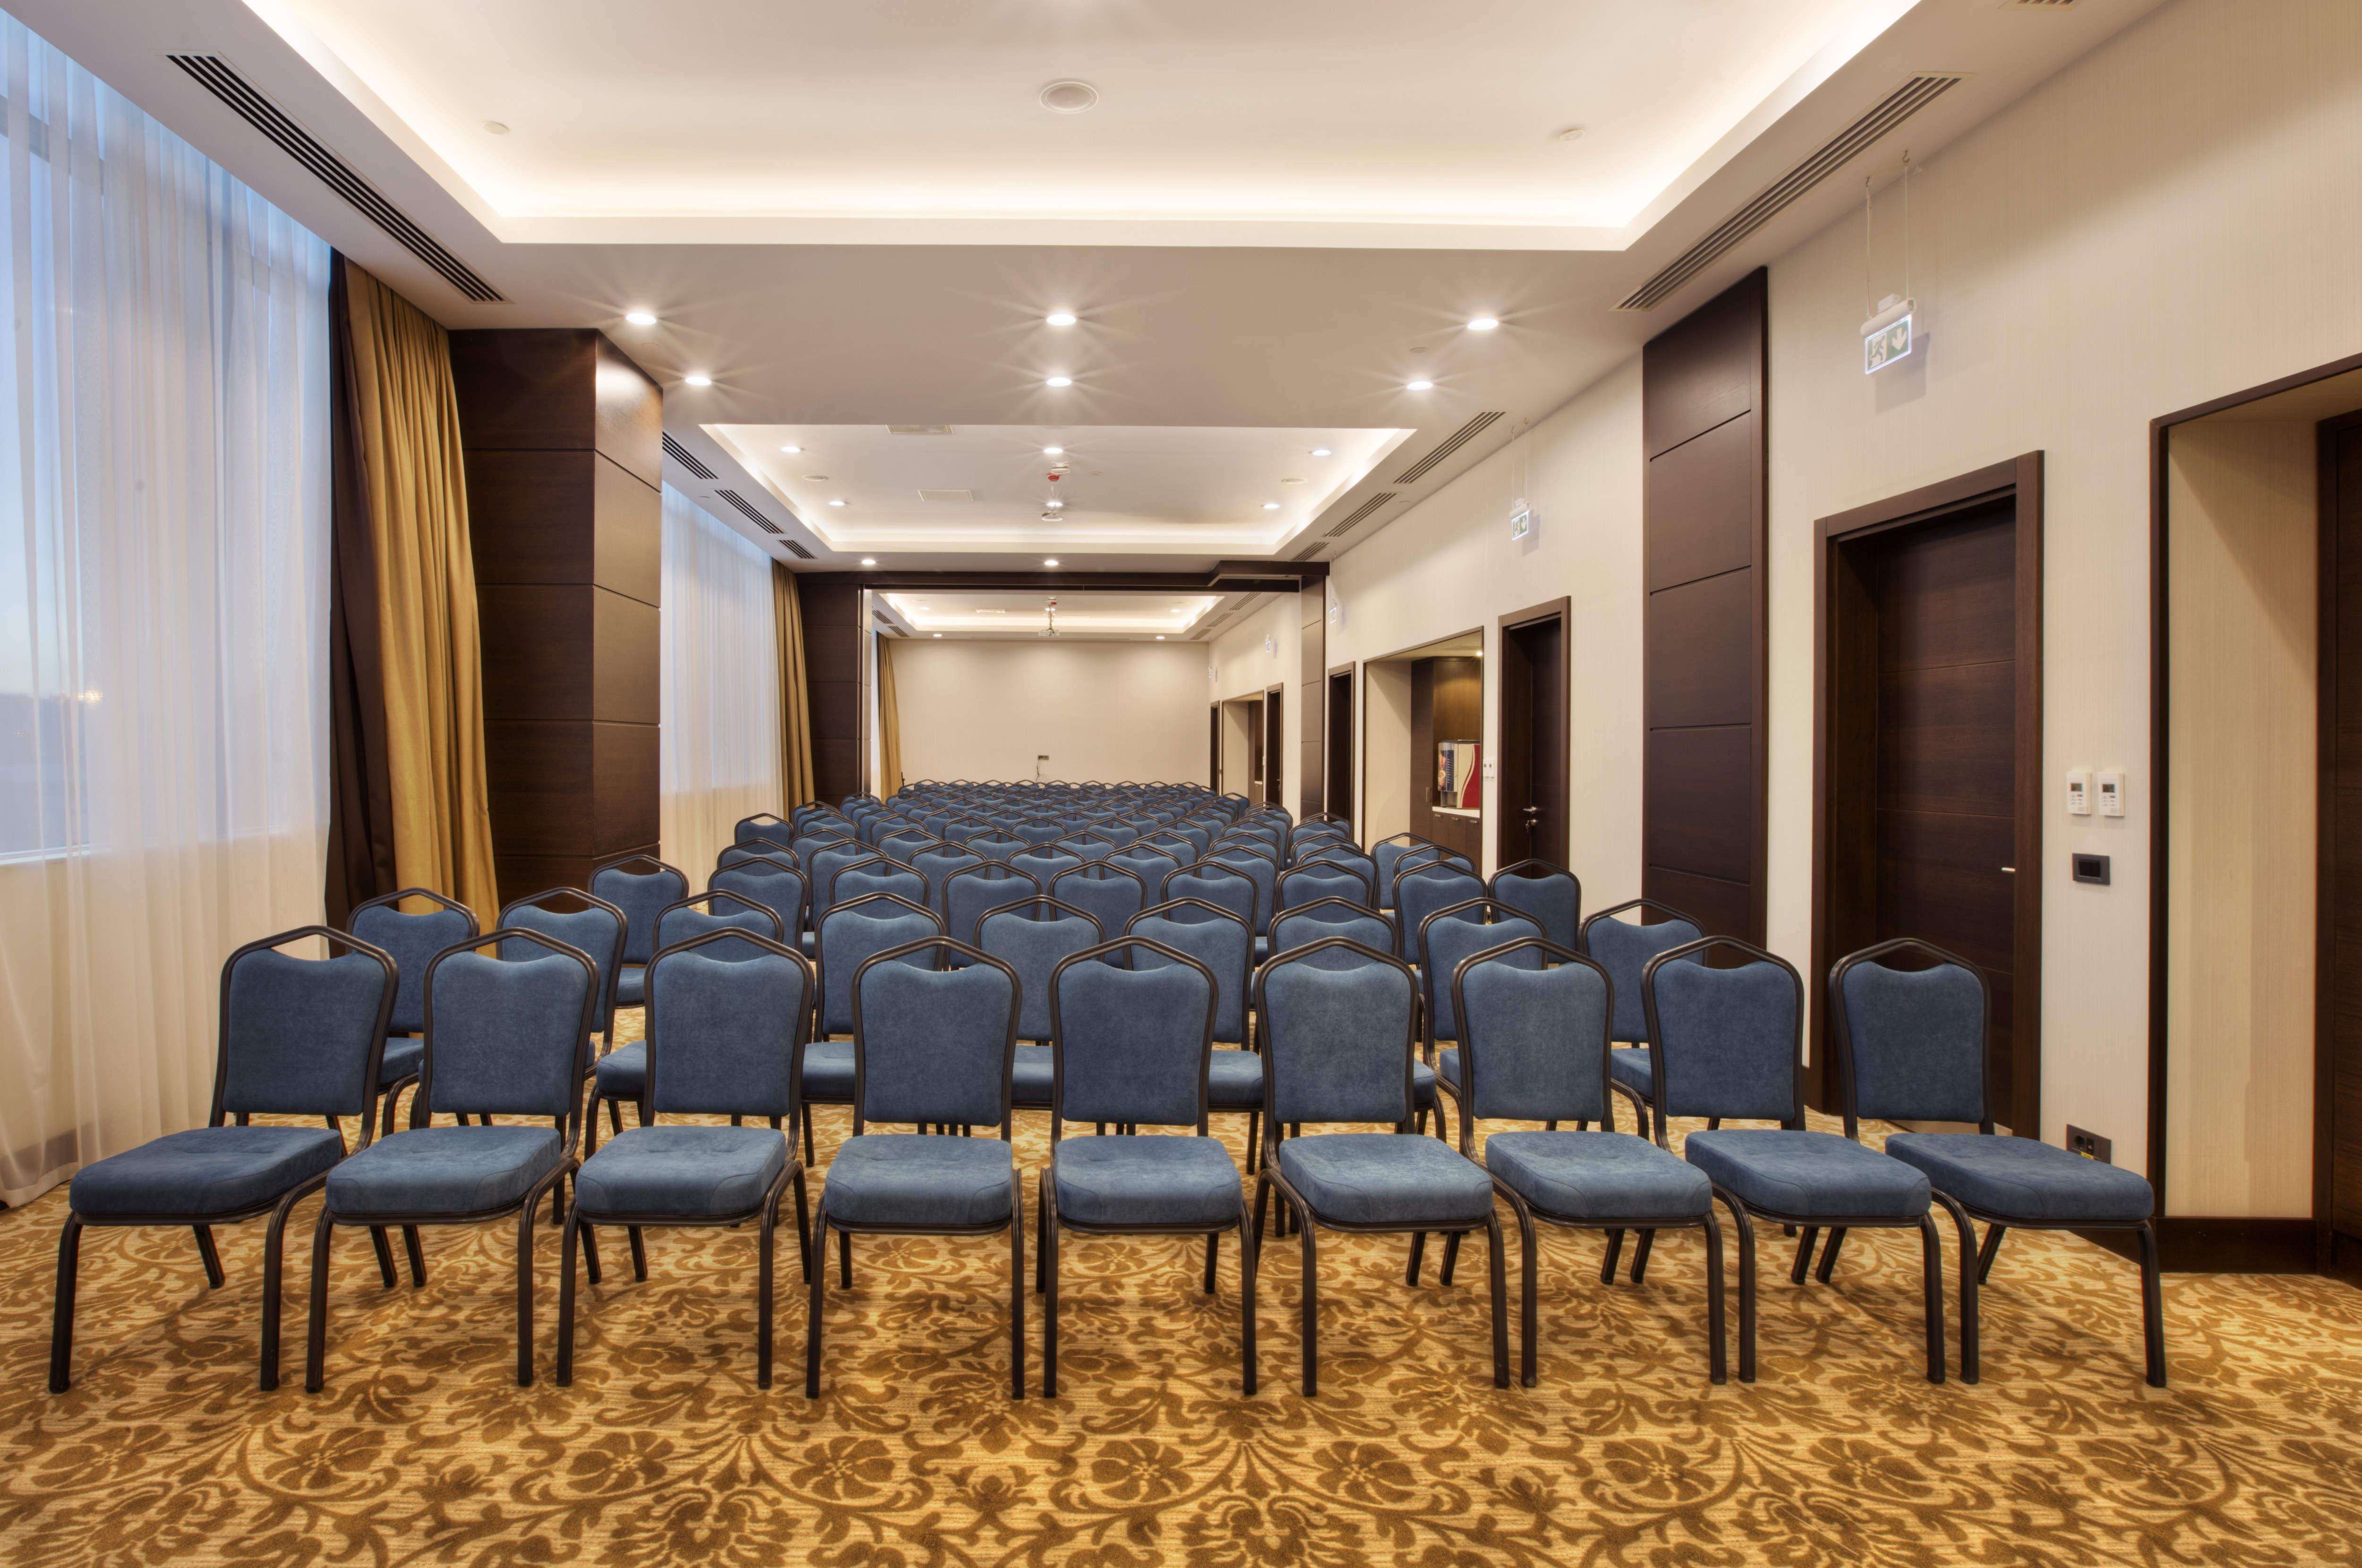 Lavandula Meeting Room Arranged Theater Style With Rows of Blue Chairs Facing Podium